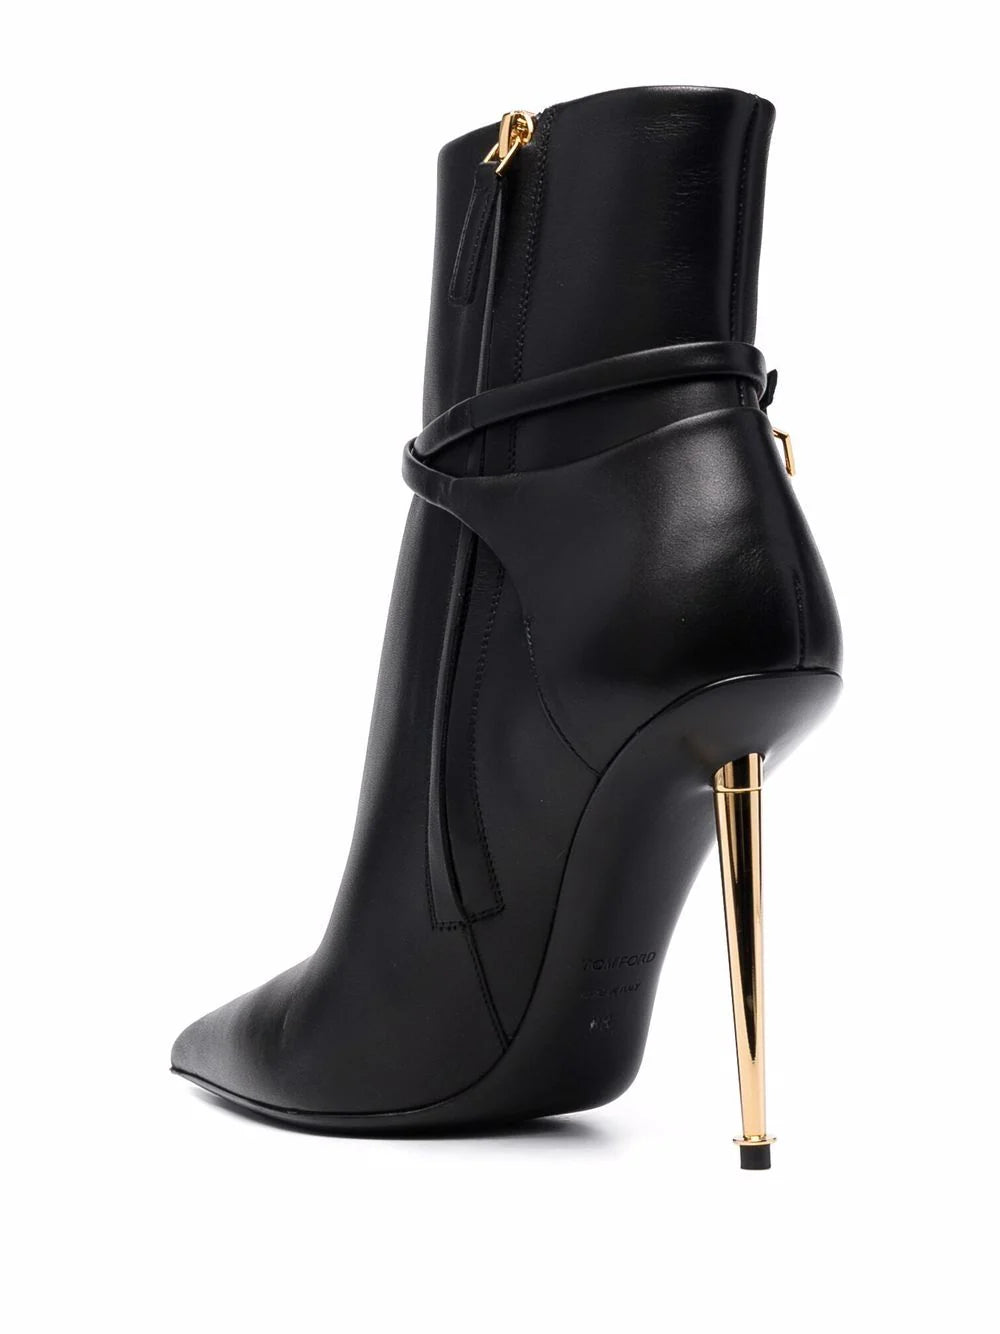 TOM FORD   Padlock ankle boots with 120mm heel